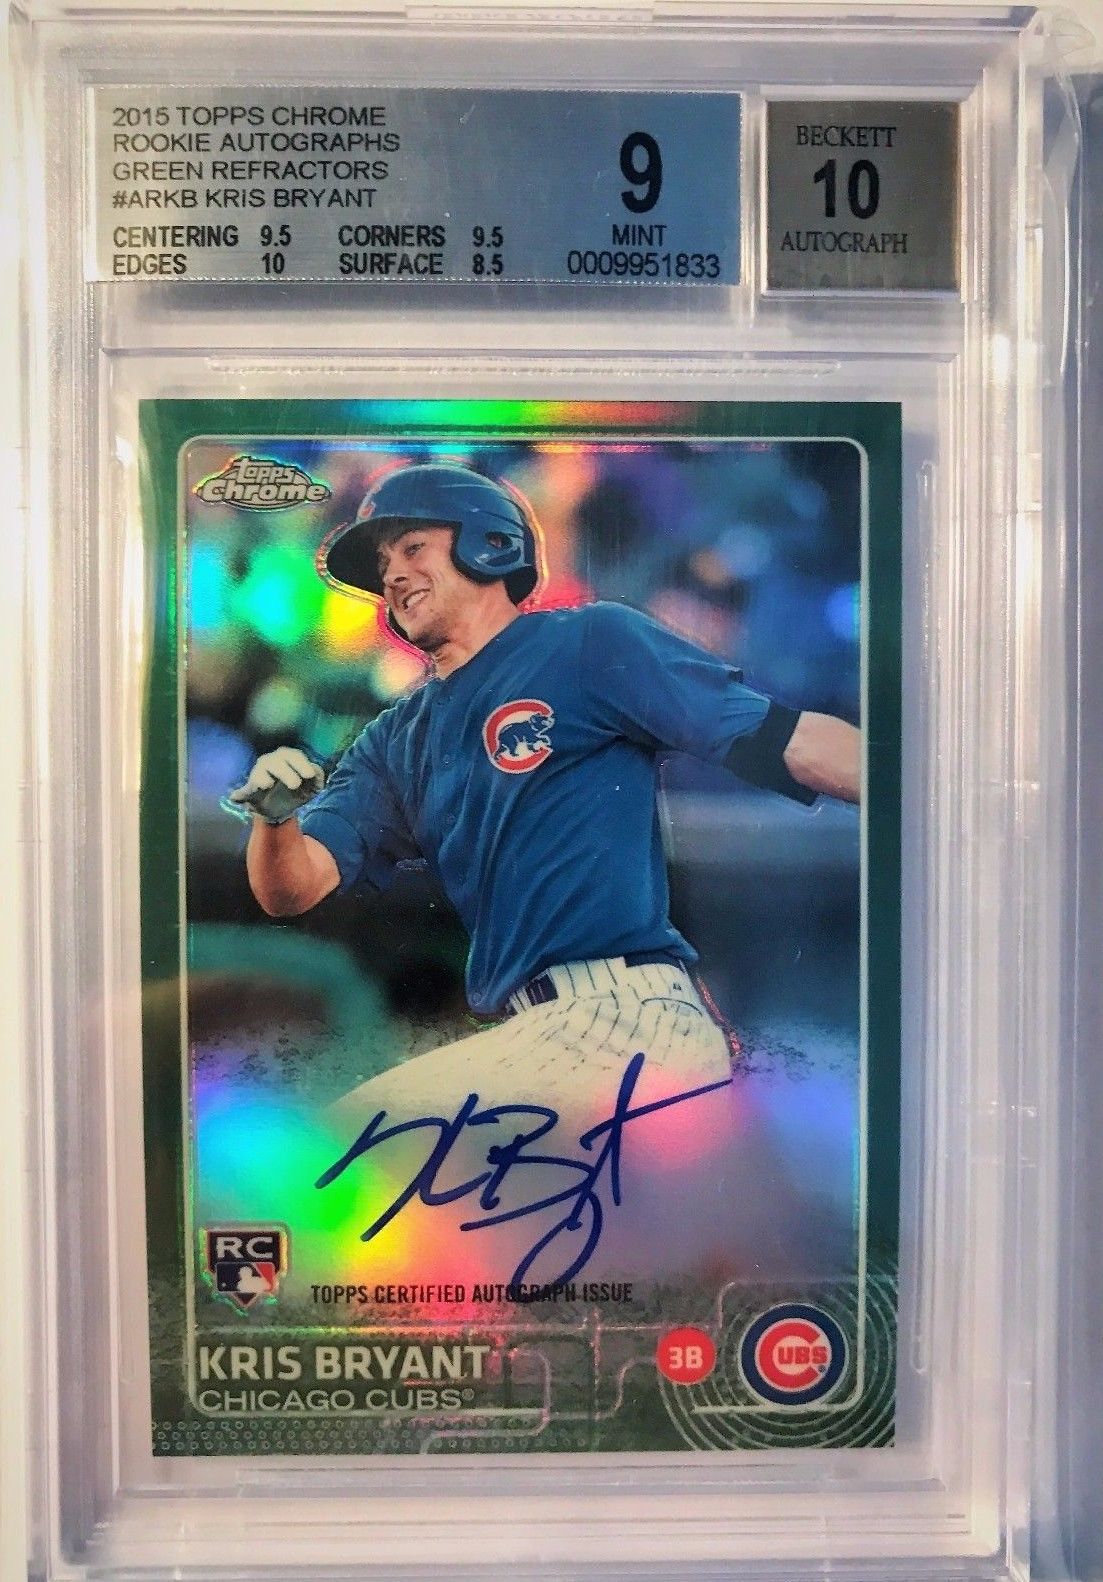 2015 Topps Chrome Kris Bryant Green Refractor Auto Jersey # 17 / 99 RC 1/1 BGS 9